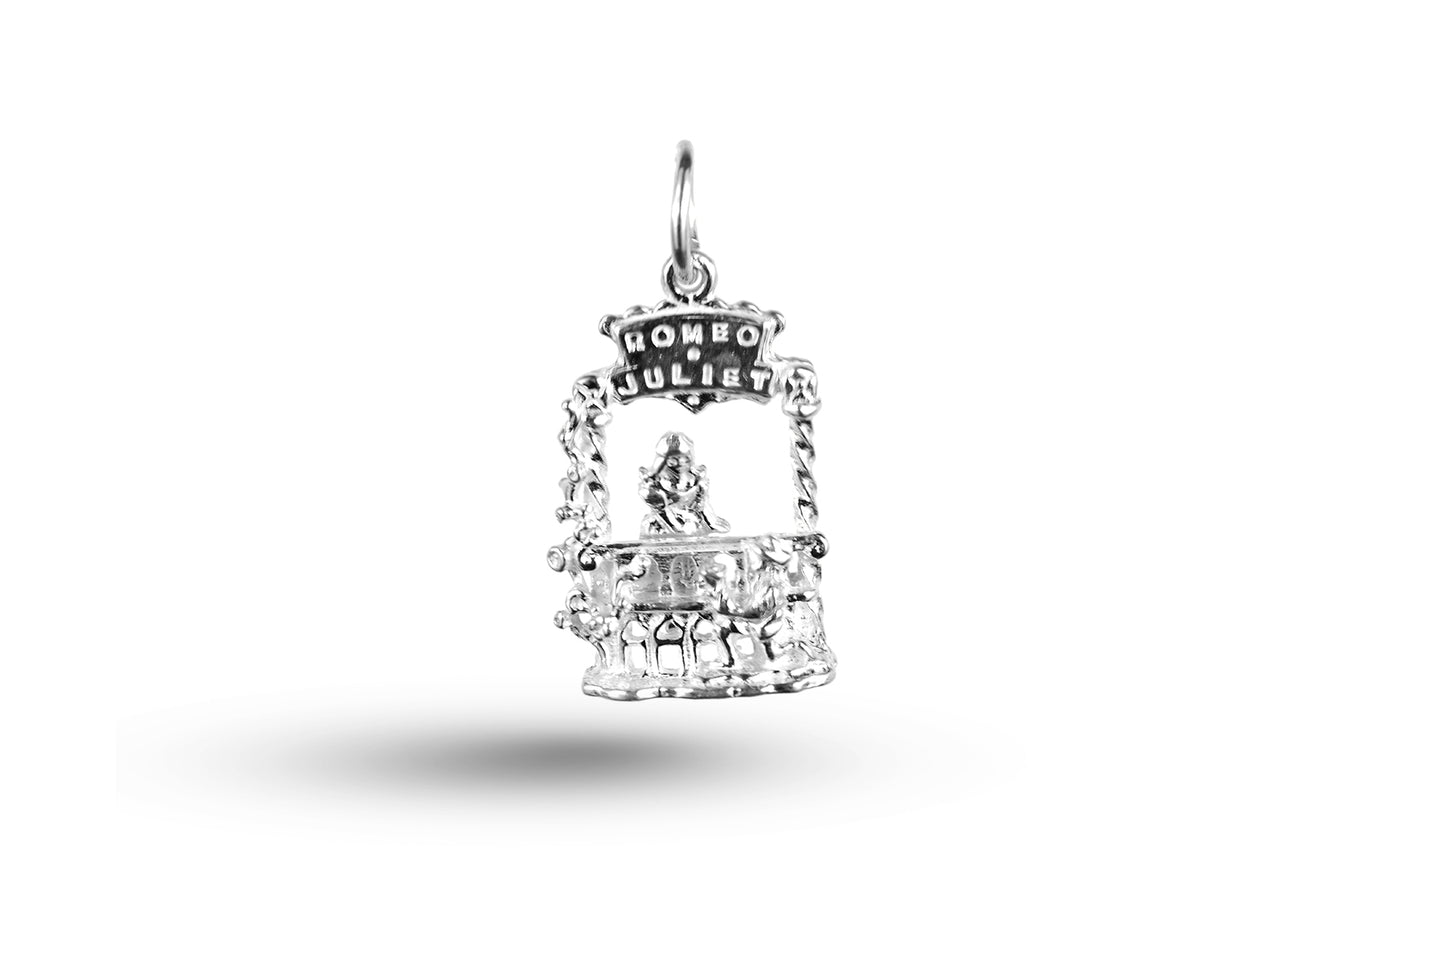 White gold Romeo and Juliet charm.